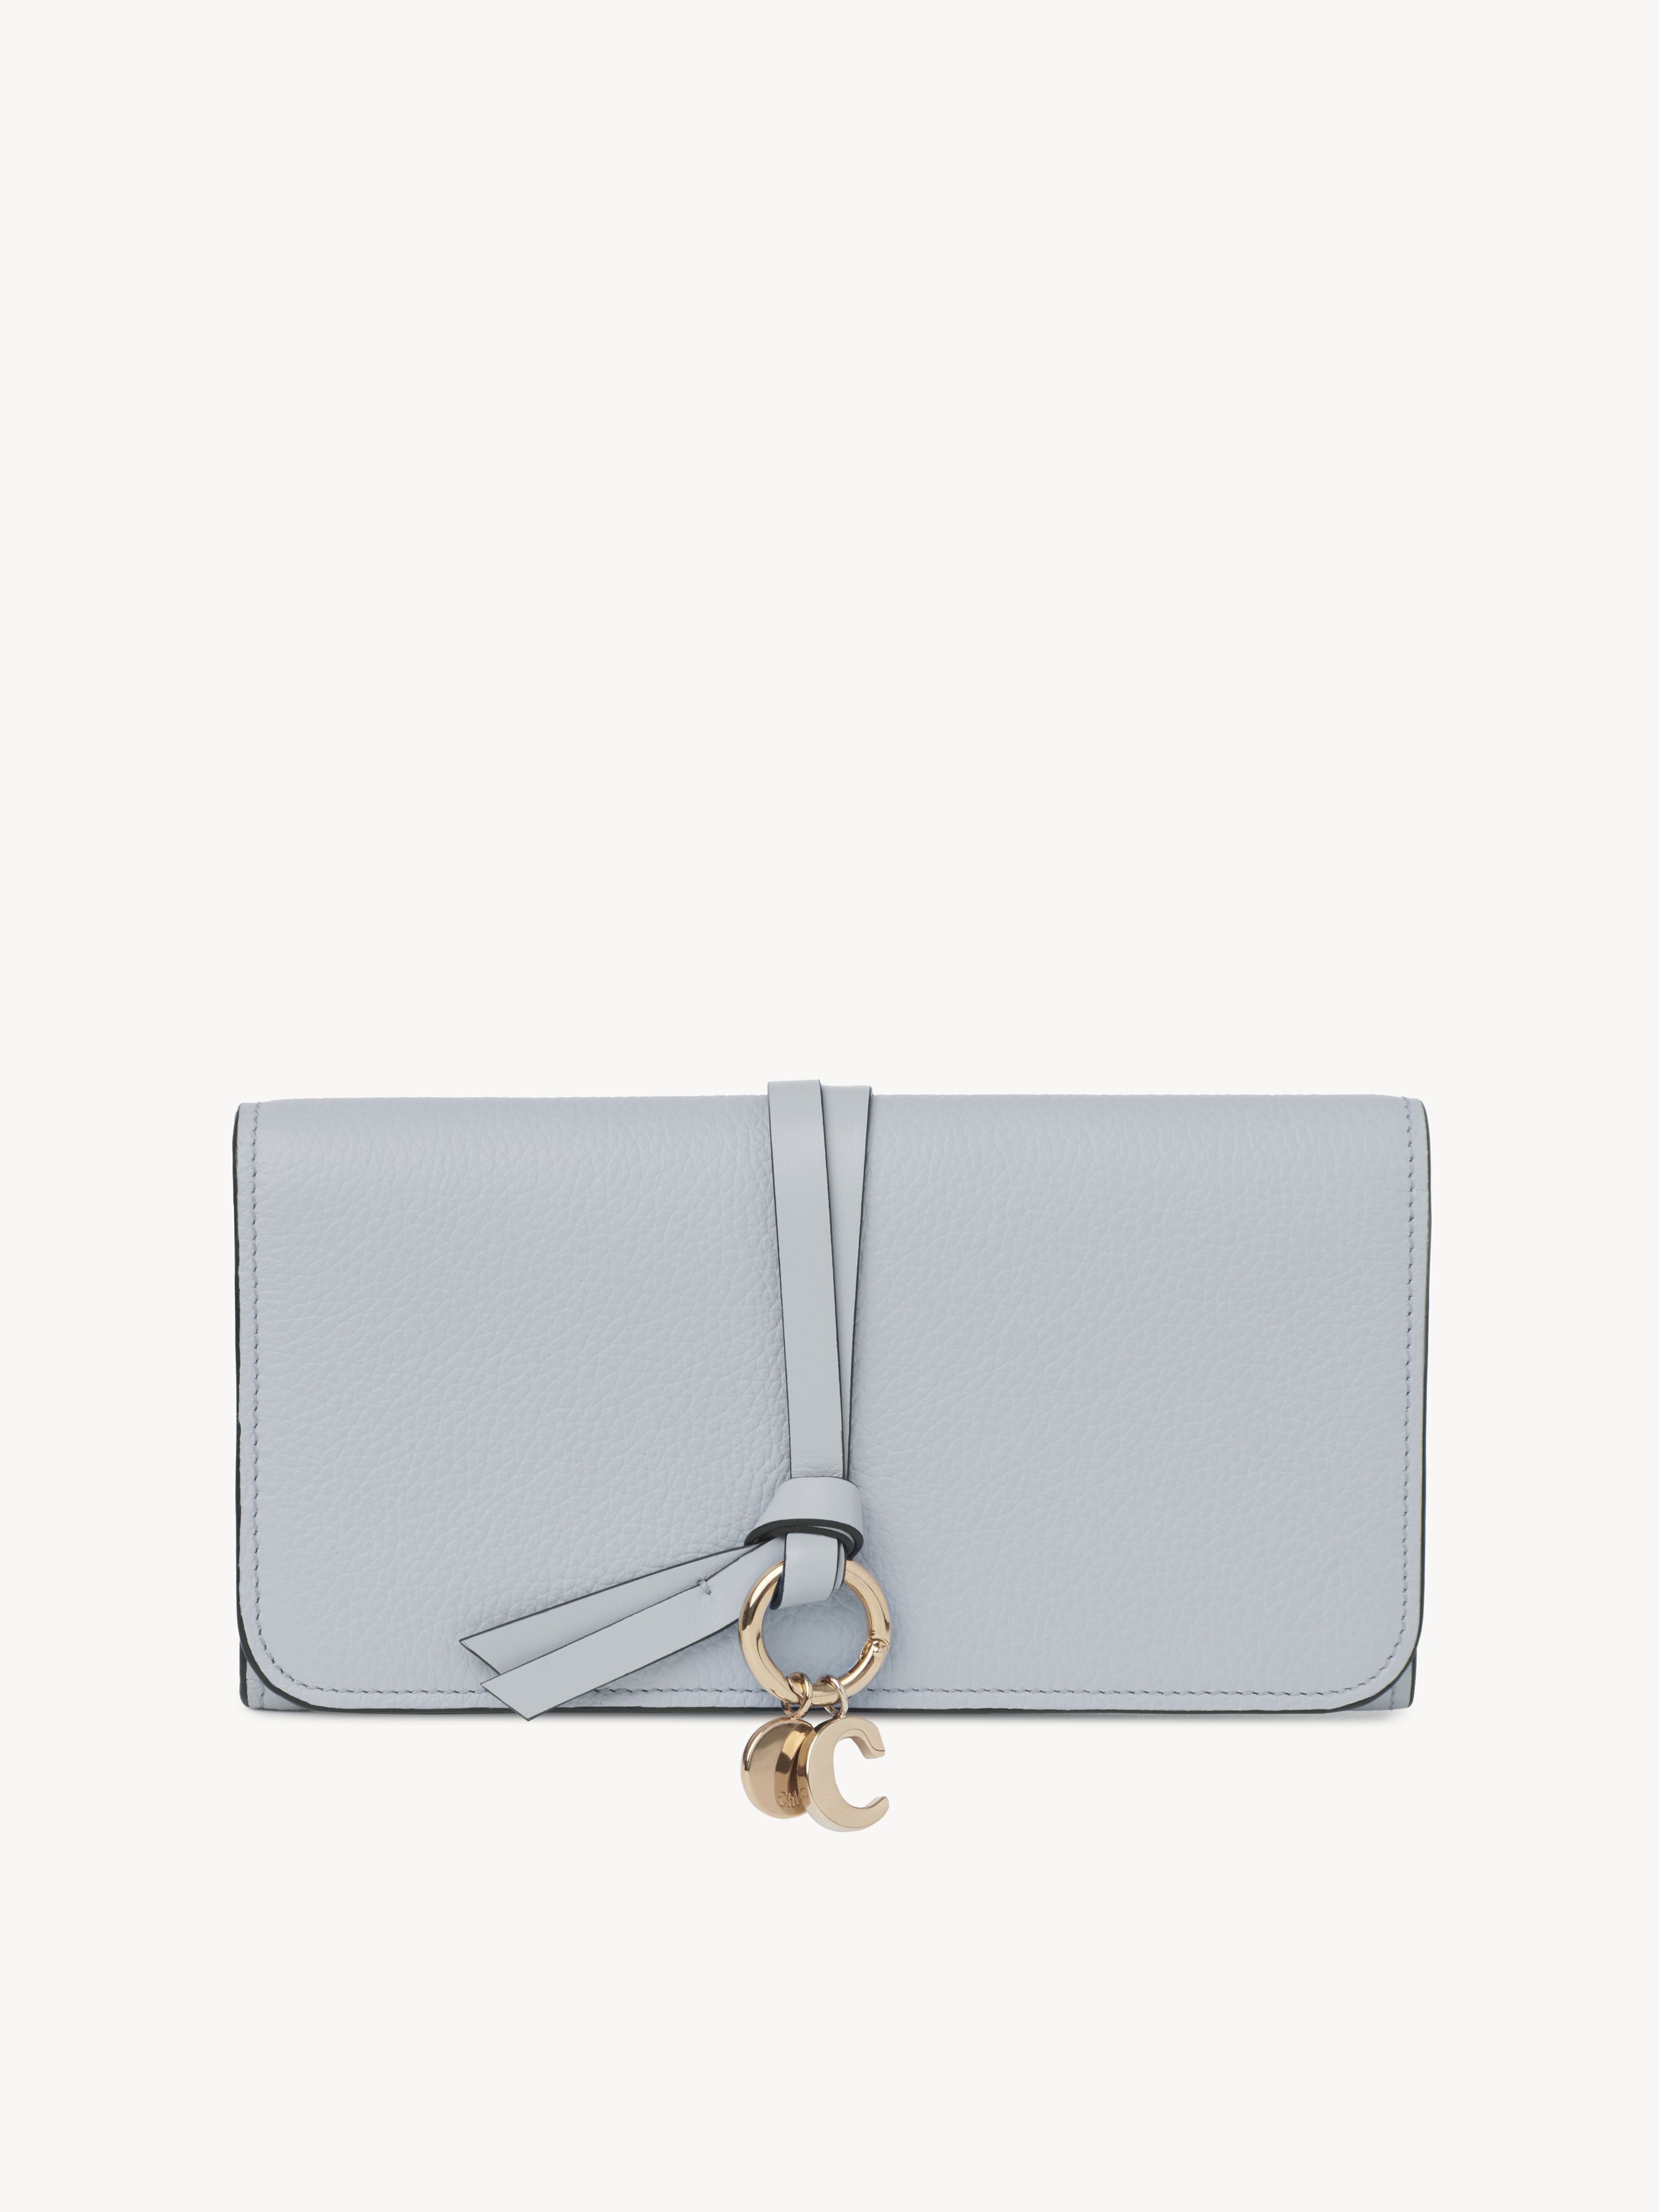 Chloé Alphabet Wallet With Flap In Grained Leather Blue Size Onesize 100% Calf-skin Leather